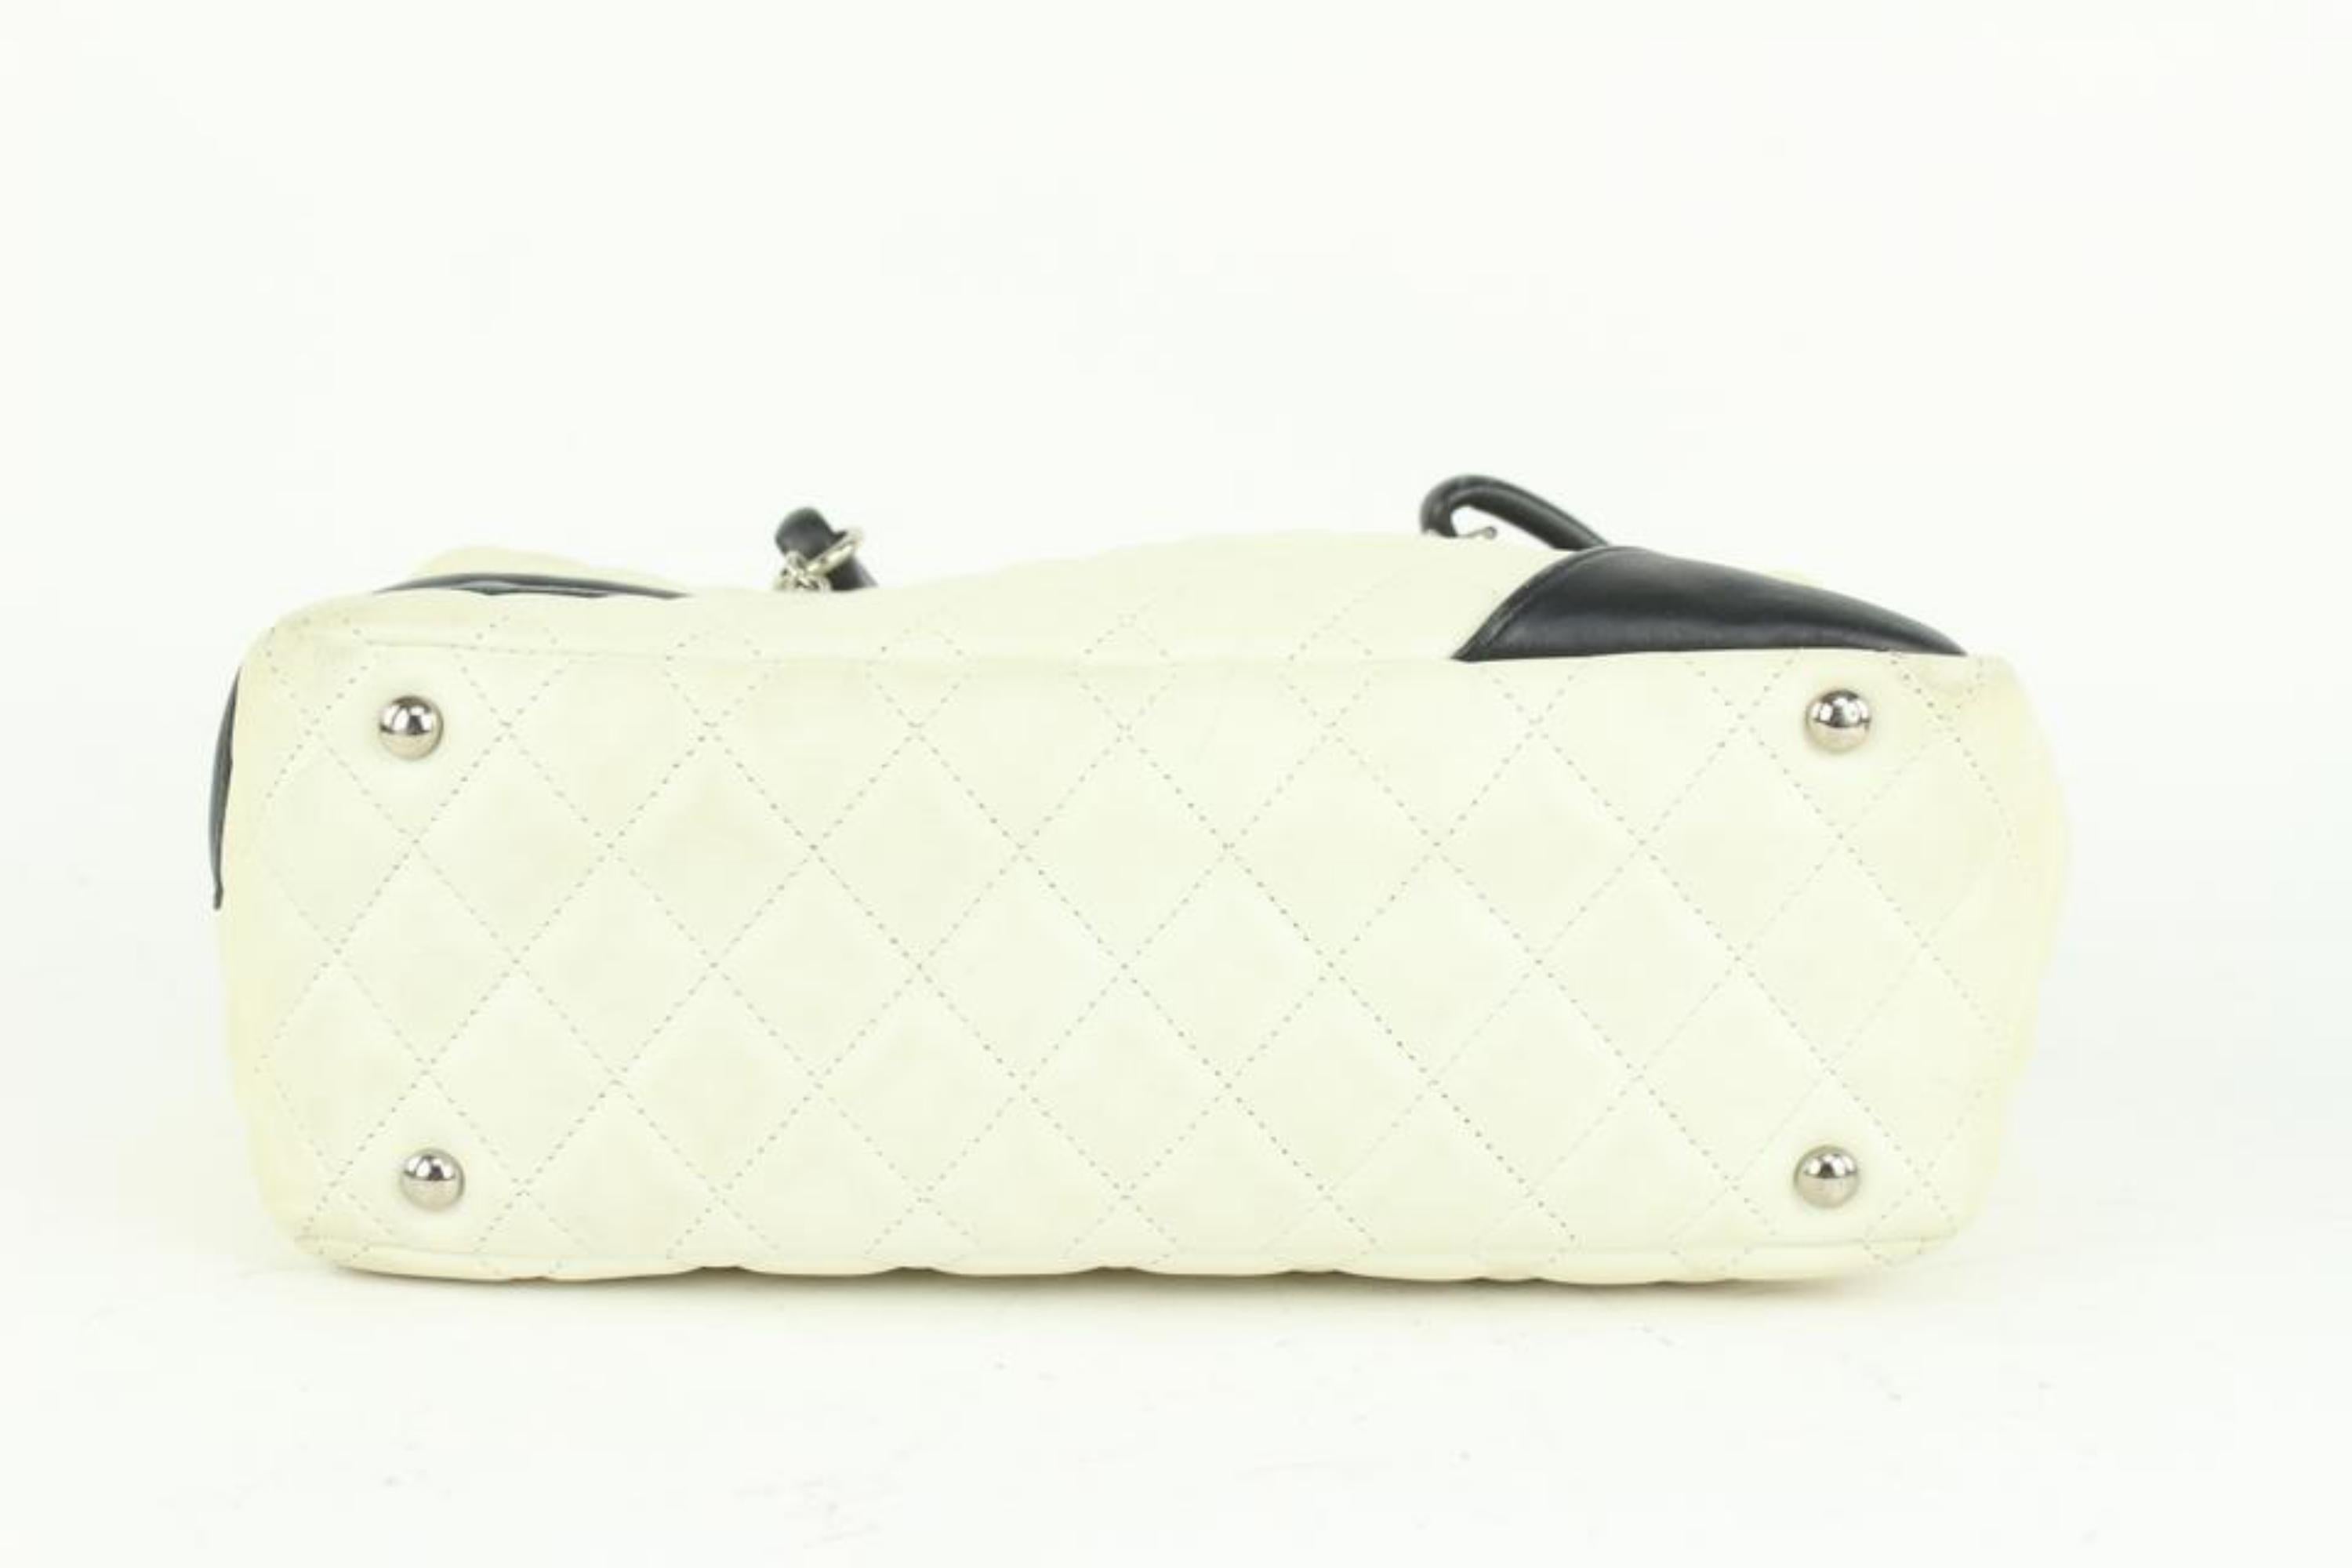 Chanel White Quilted Leather Cambon Boston Camera Bag 7cc1015 1